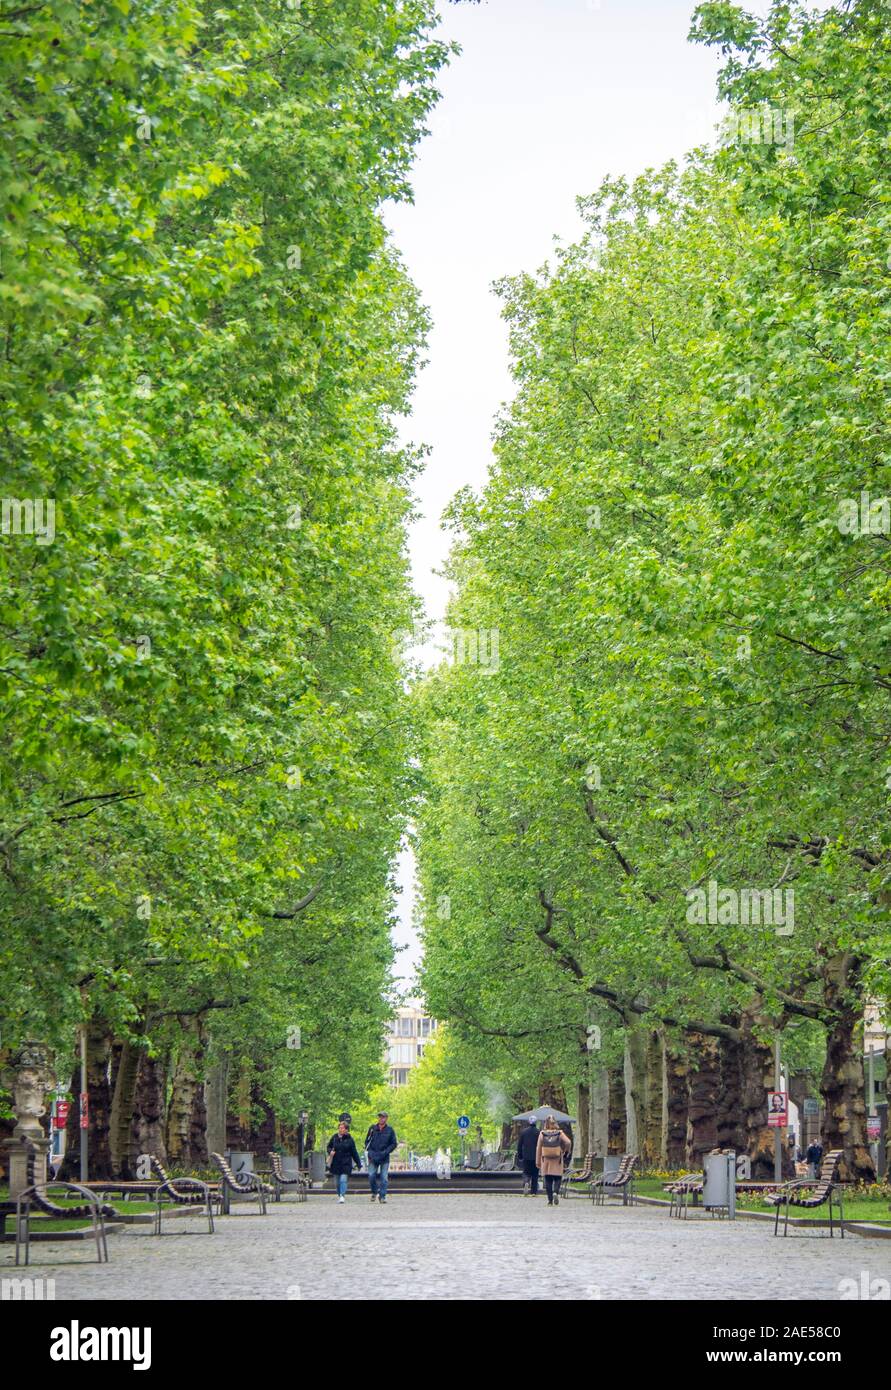 Hauptstrasse pedestrian boulevard tree lined with sycamore trees in spring Innere Neustadt Dresden Saxony Germany. Stock Photo